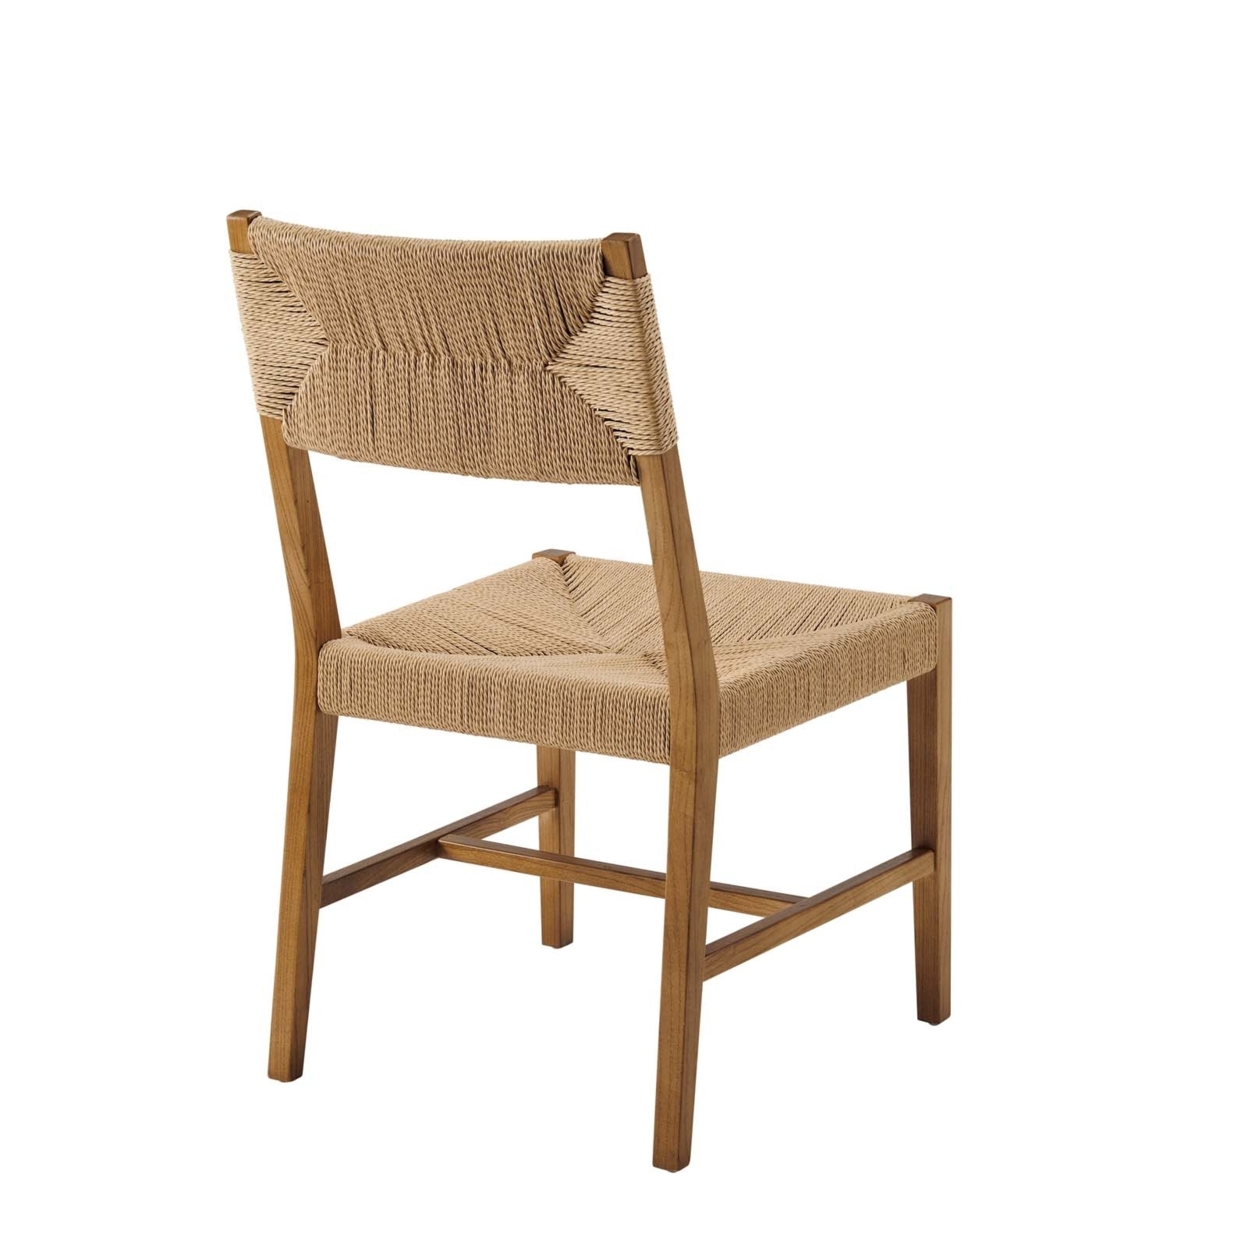 Bodie Wood Dining Chair, Natural Natural